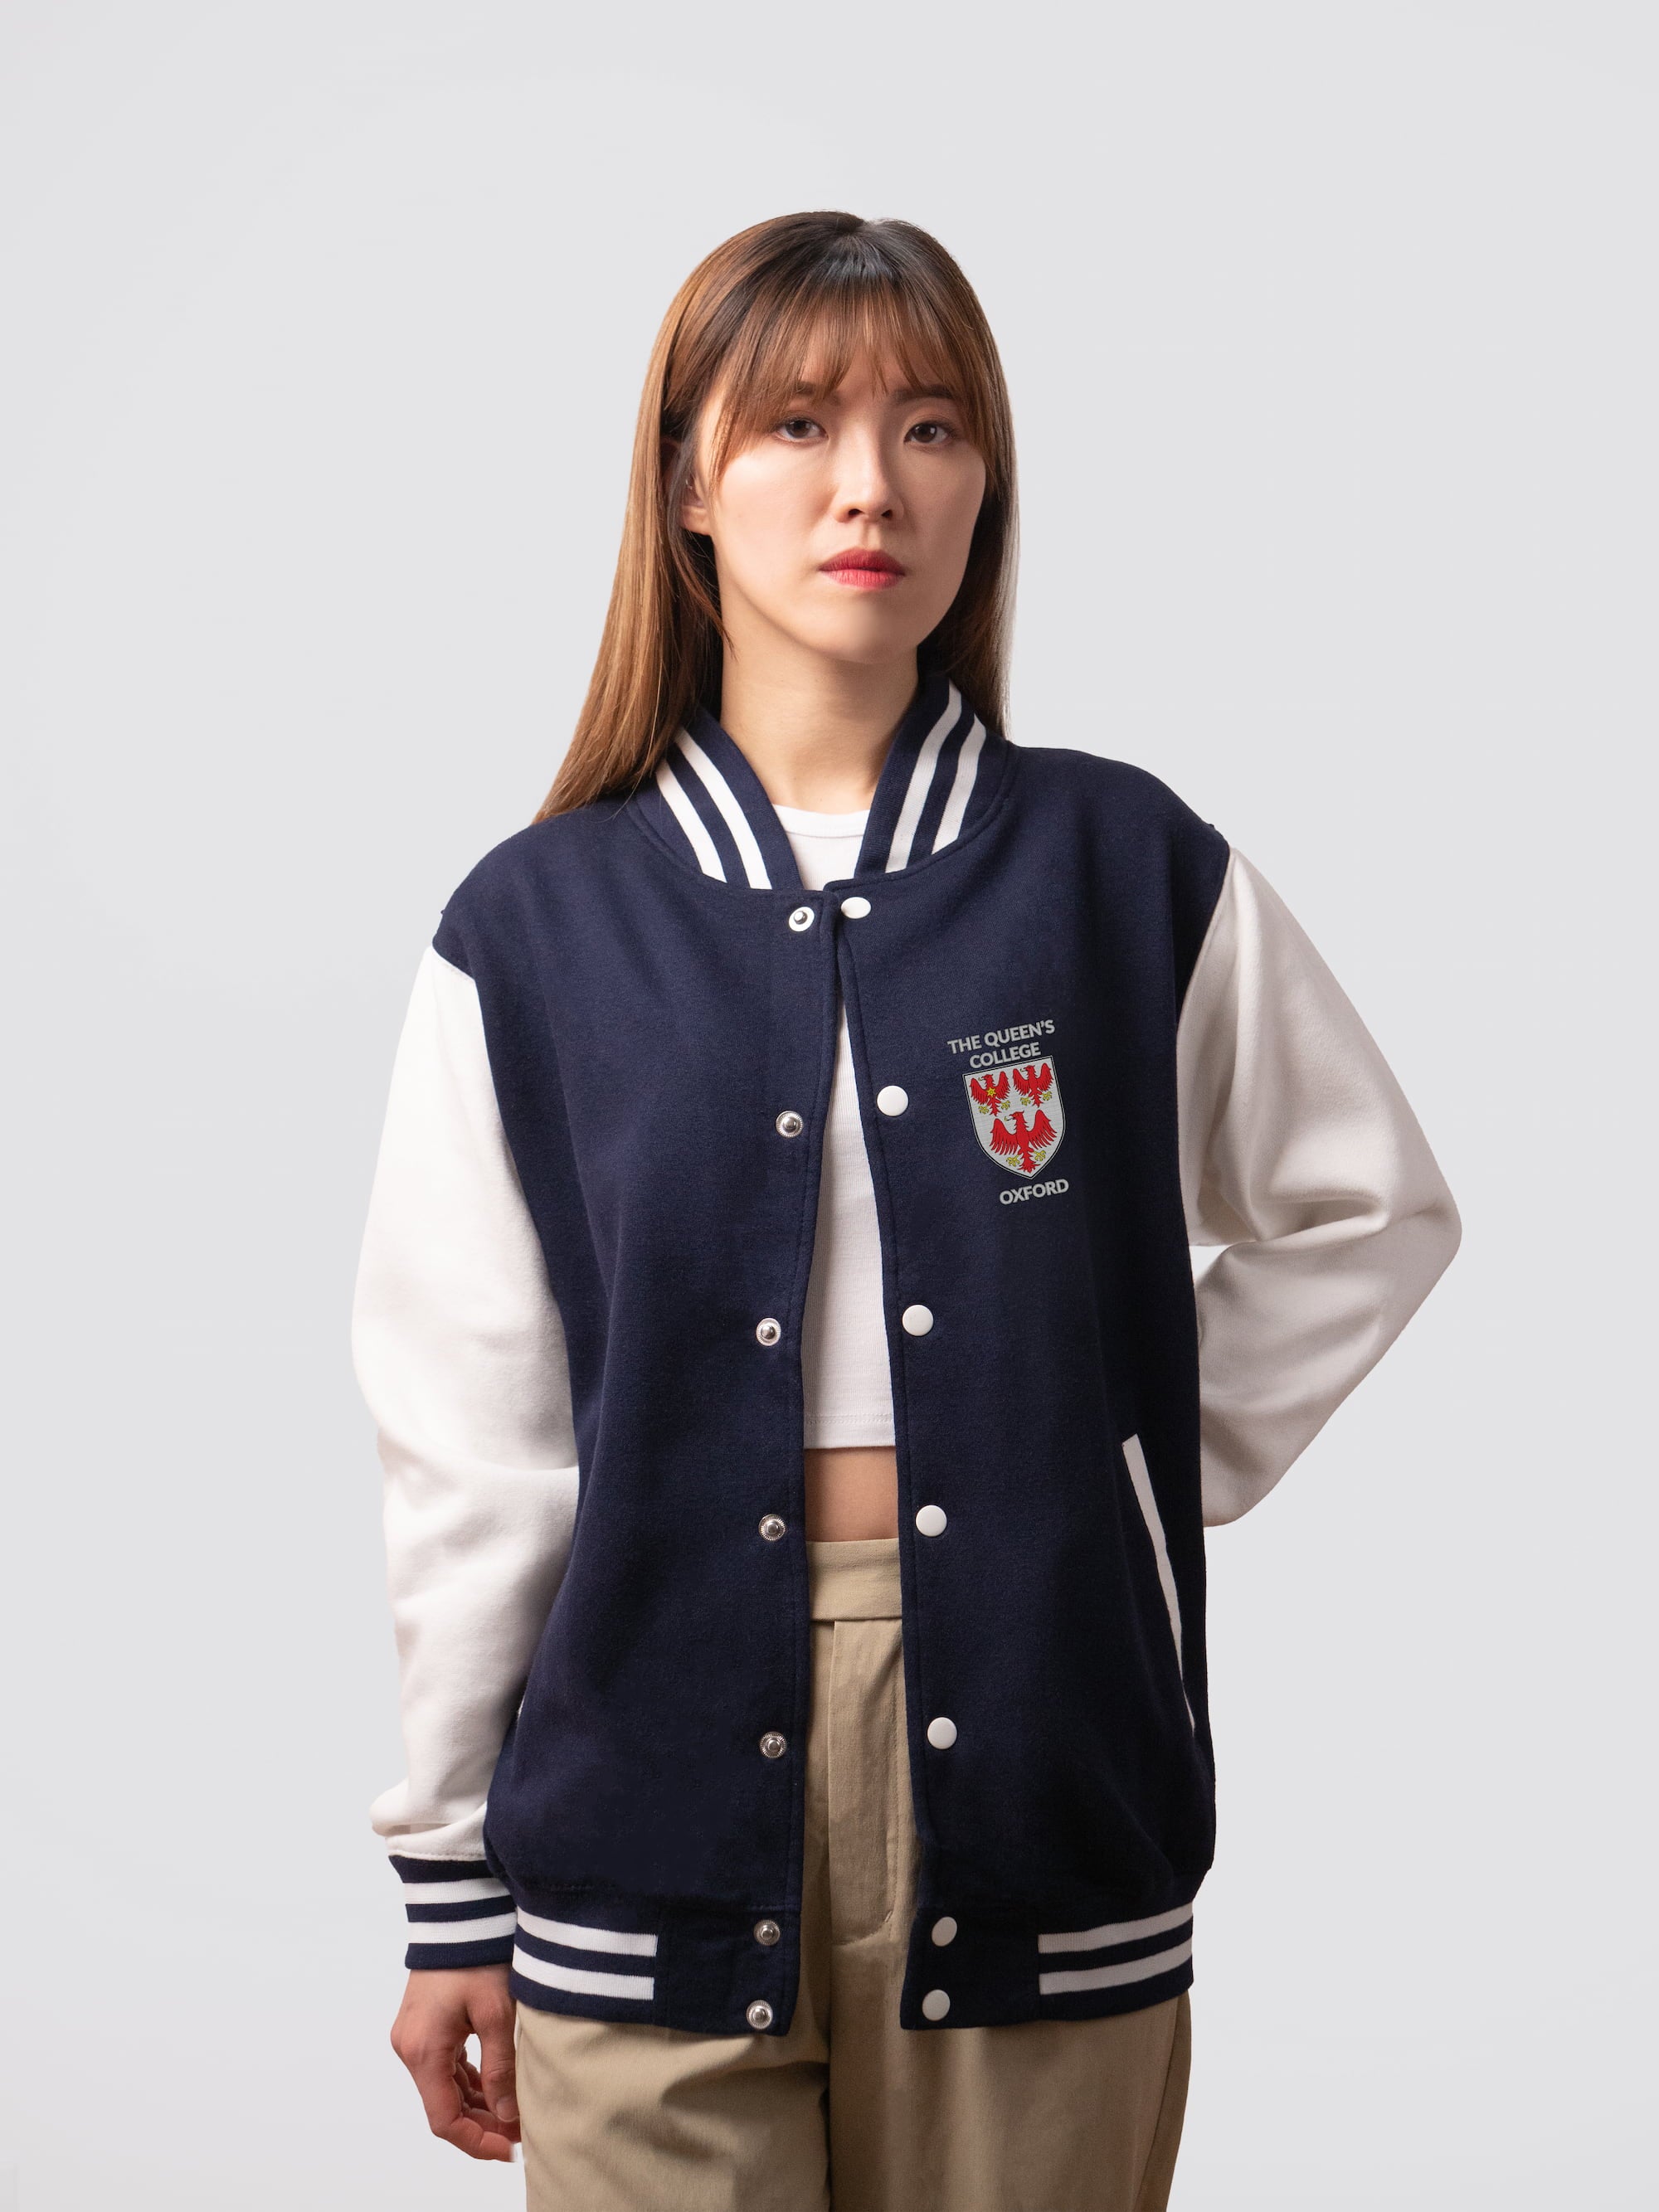 Retro style varsity jacket, with embroidered The Queen's crest